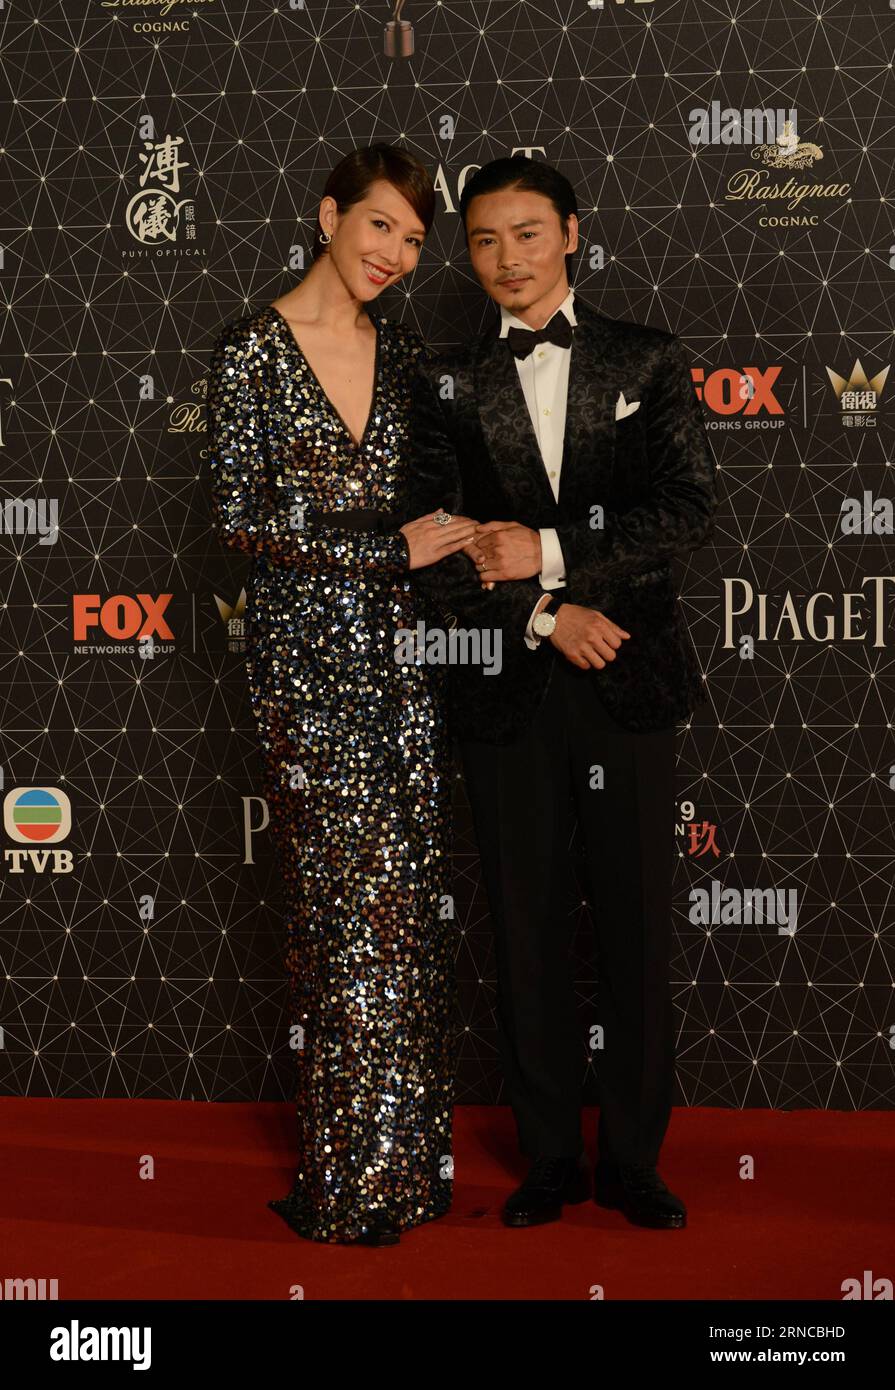 (160403) -- HONG KONG, April 3, 2016 -- Actress Ada Choi (L) and her husband Zhang Jin pose on the red carpet before the 35th Hong Kong Film Awards presentation ceremony in Hong Kong, south China, April 3, 2016. )(mcg) CHINA-HONG KONG-FILM AWARDS-RED CARPET (CN) LiuxYun PUBLICATIONxNOTxINxCHN   Hong Kong April 3 2016 actress Ada Choi l and her Husband Zhang Jin Pose ON The Red Carpet Before The 35th Hong Kong Film Awards PRESENTATION Ceremony in Hong Kong South China April 3 2016 McG China Hong Kong Film Awards Red Carpet CN LiuxYun PUBLICATIONxNOTxINxCHN Stock Photo